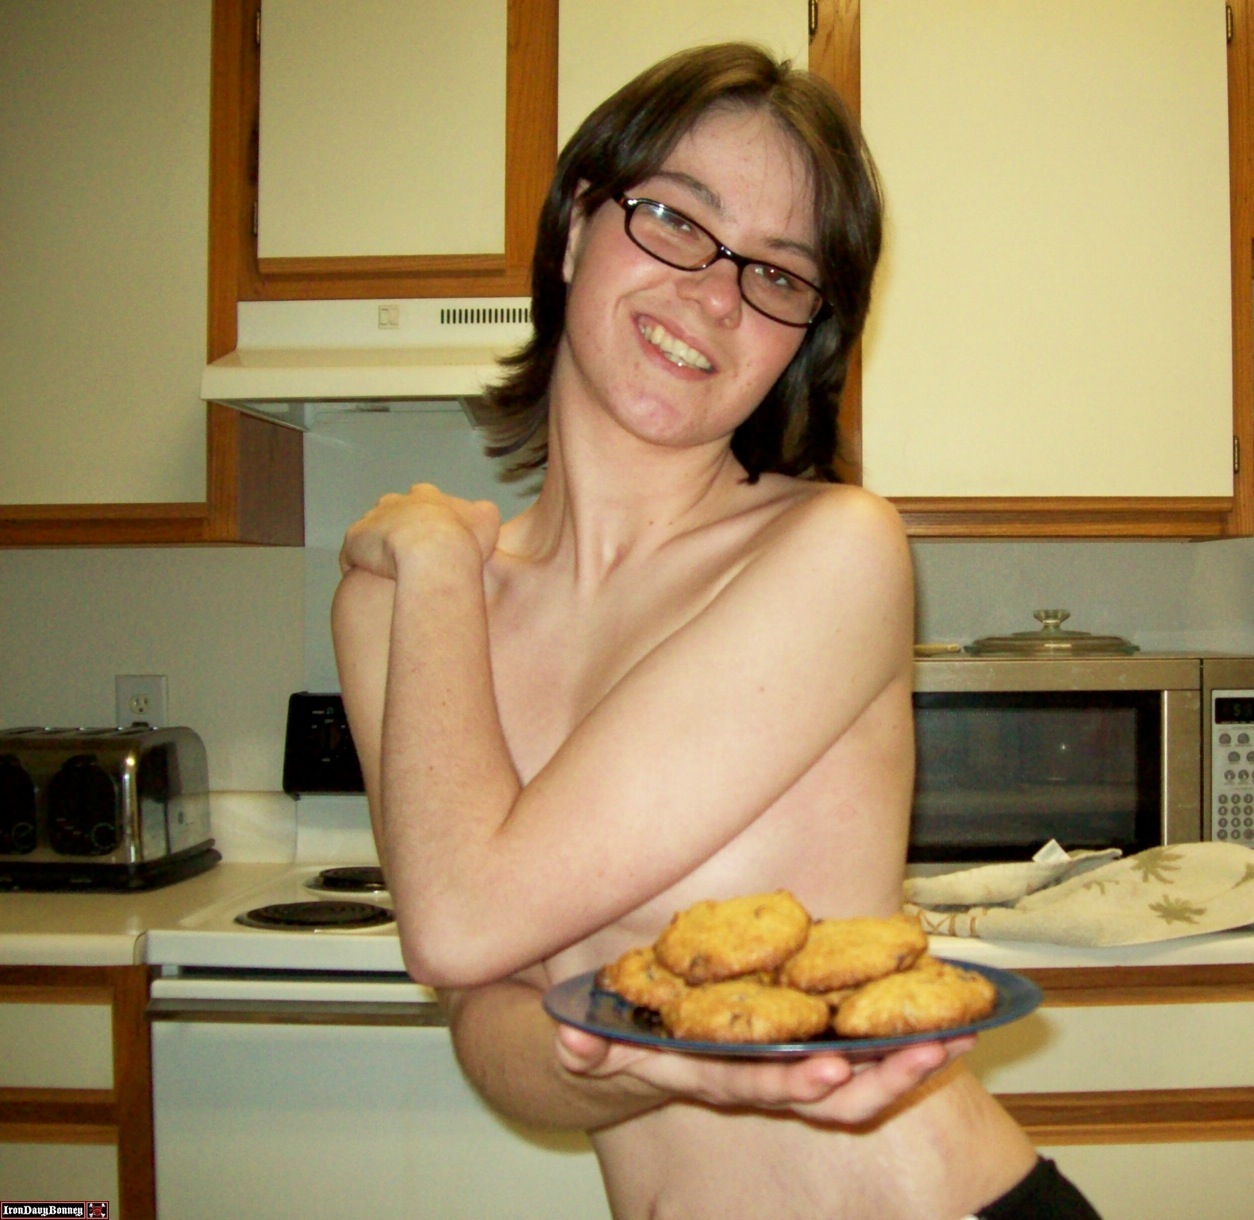 She is a butterface, her boobs are small, but she has cookies! 